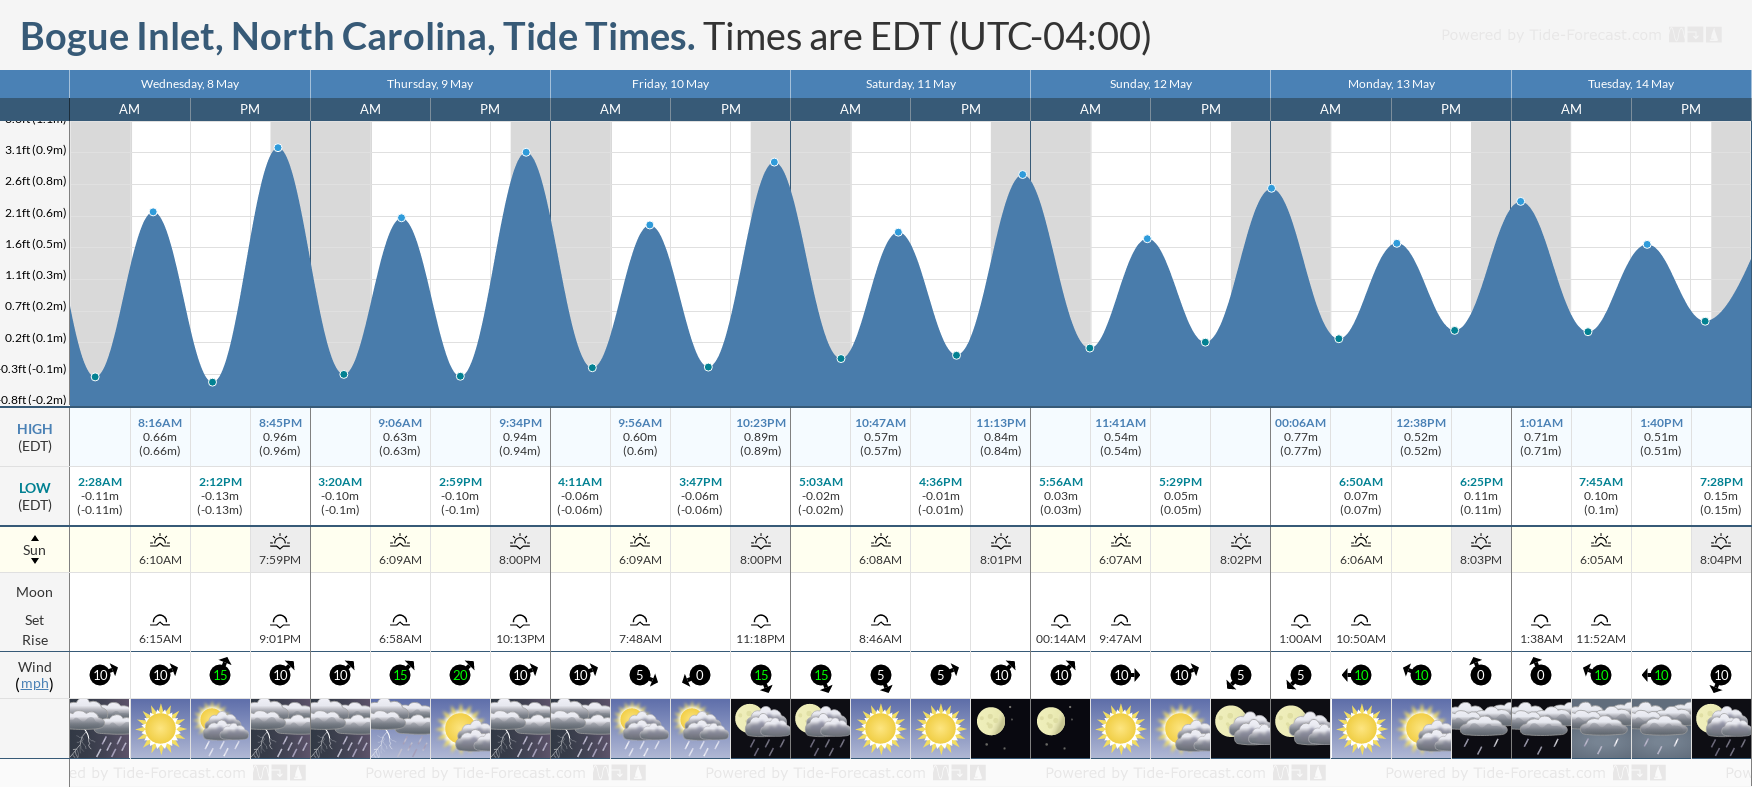 Bogue Inlet, North Carolina Tide Chart including high and low tide times for the next 7 days